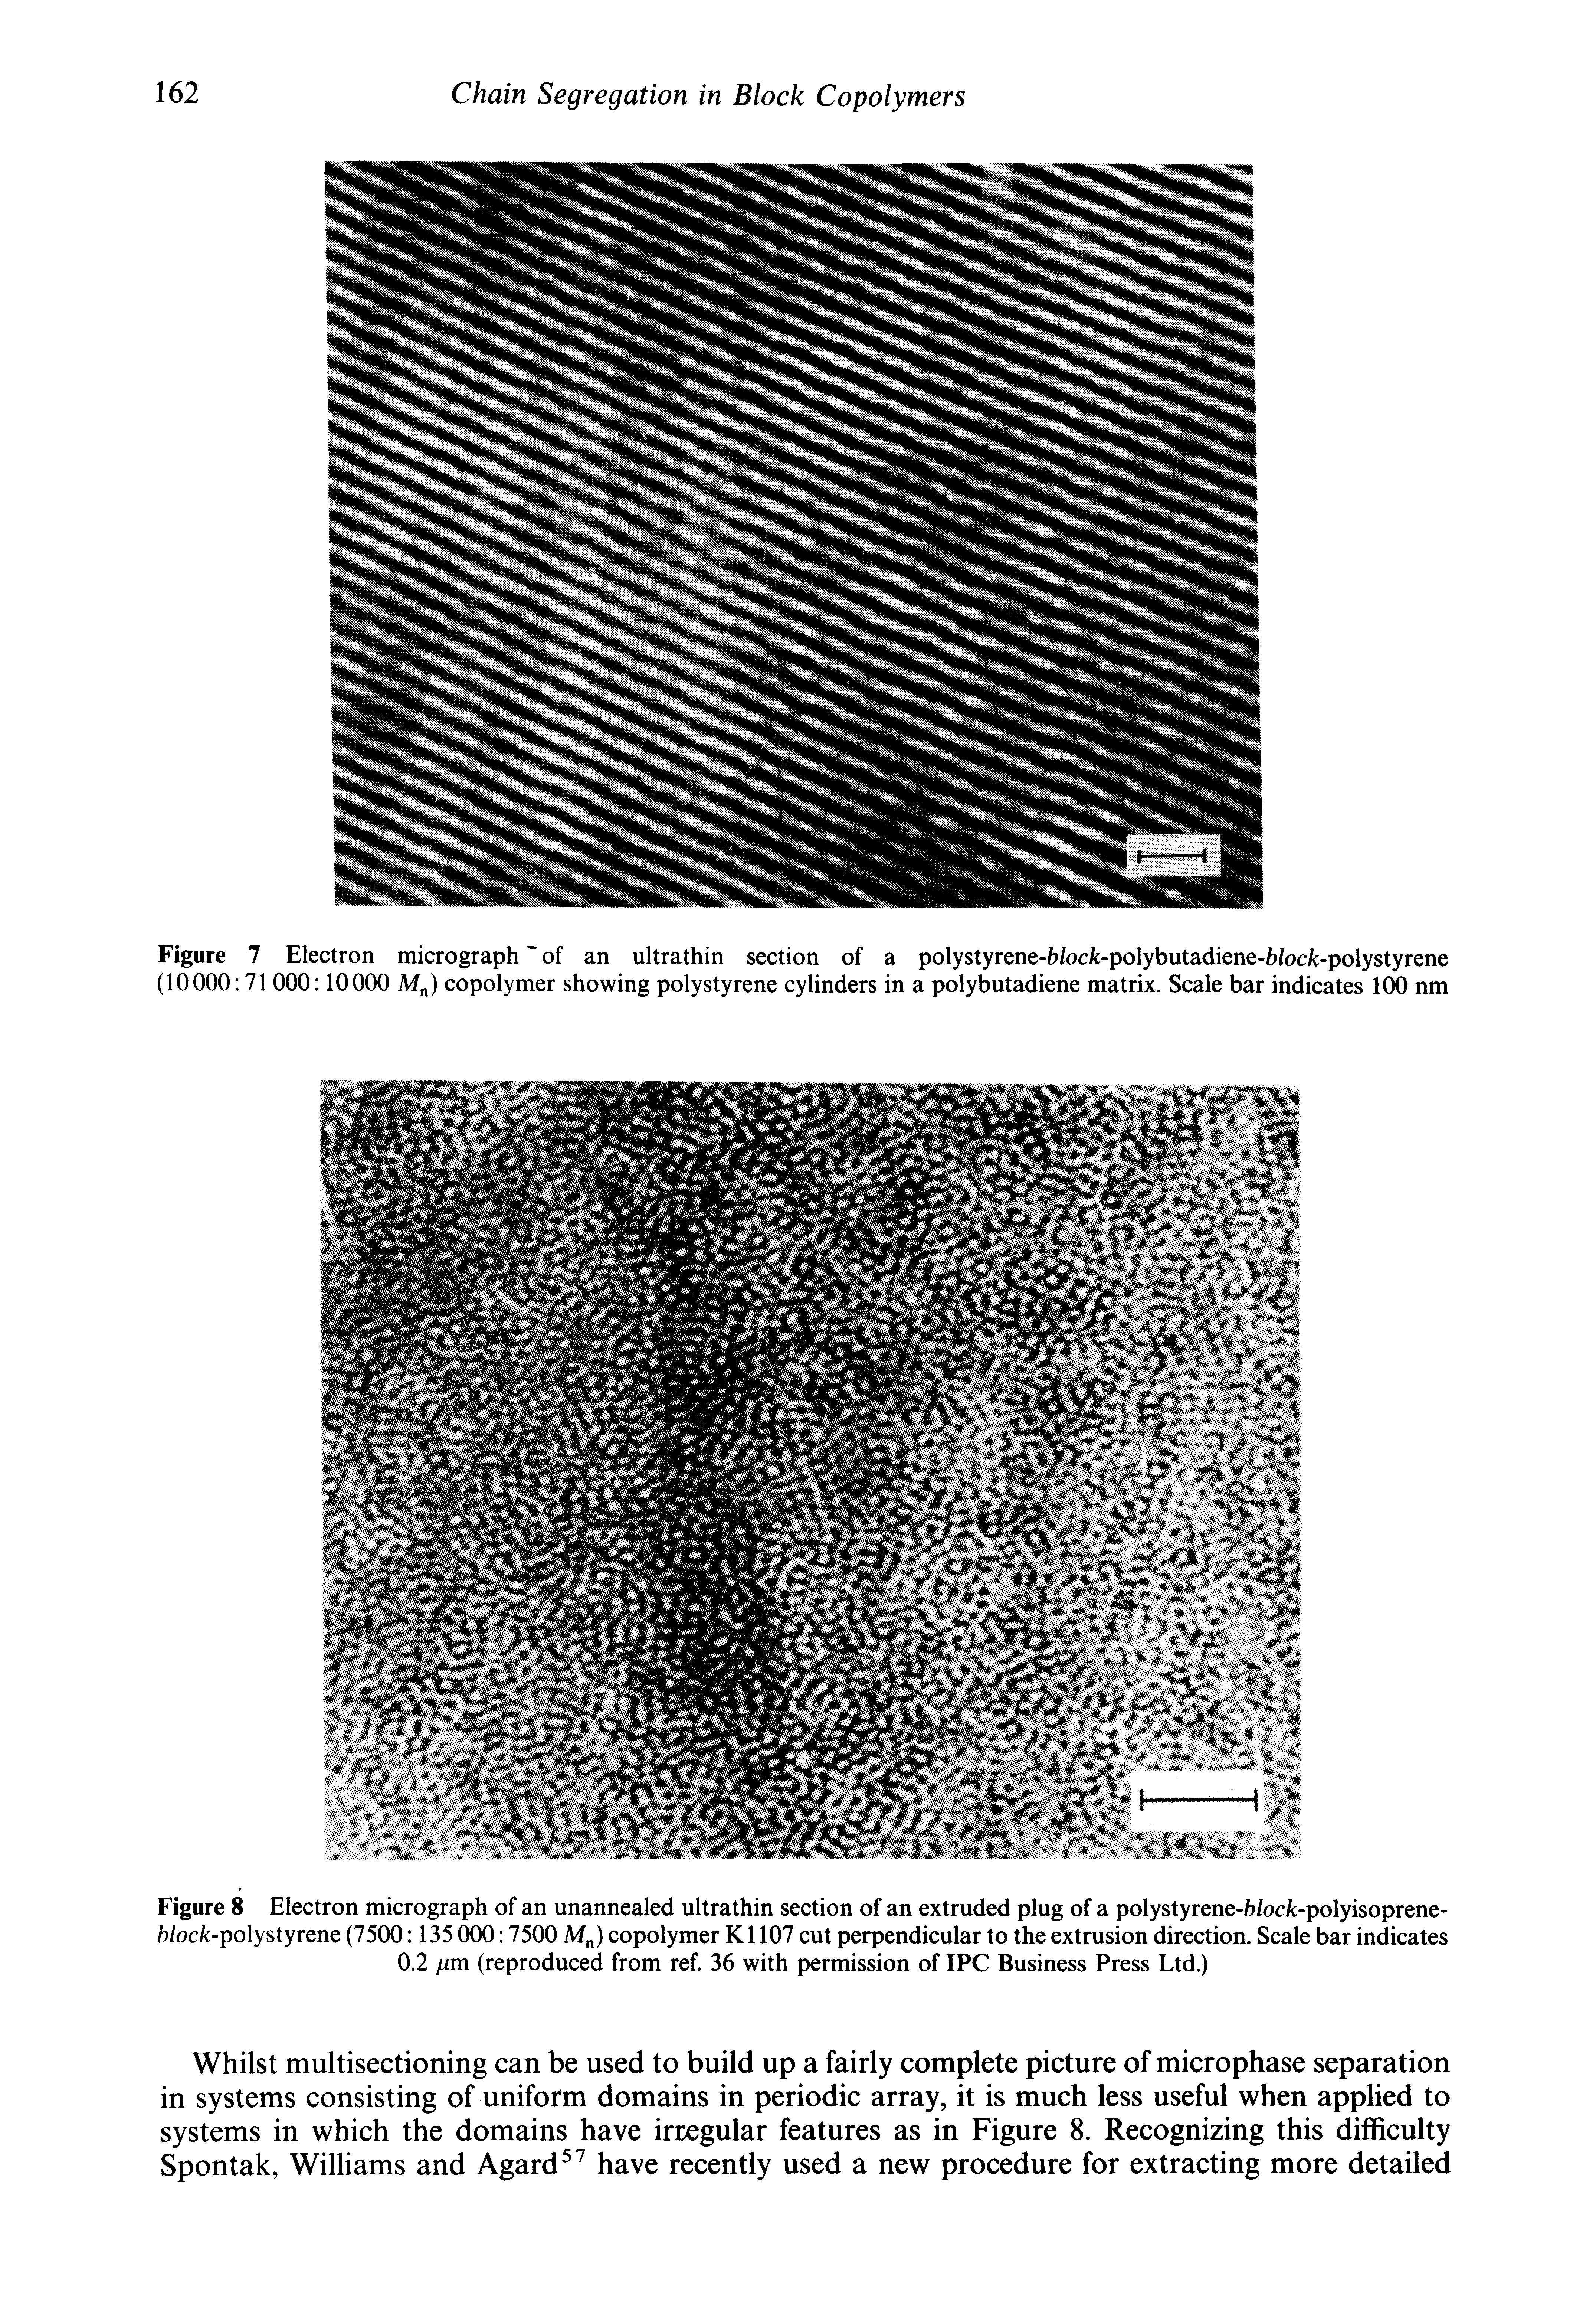 Figure 7 Electron micrograph of an ultrathin section of a polystyrene-h/ocfc-polybutadiene-h/oci -polystyrene (10000 71 000 10000 M ) copolymer showing polystyrene cylinders in a polybutadiene matrix. Scale bar indicates 100 nm...